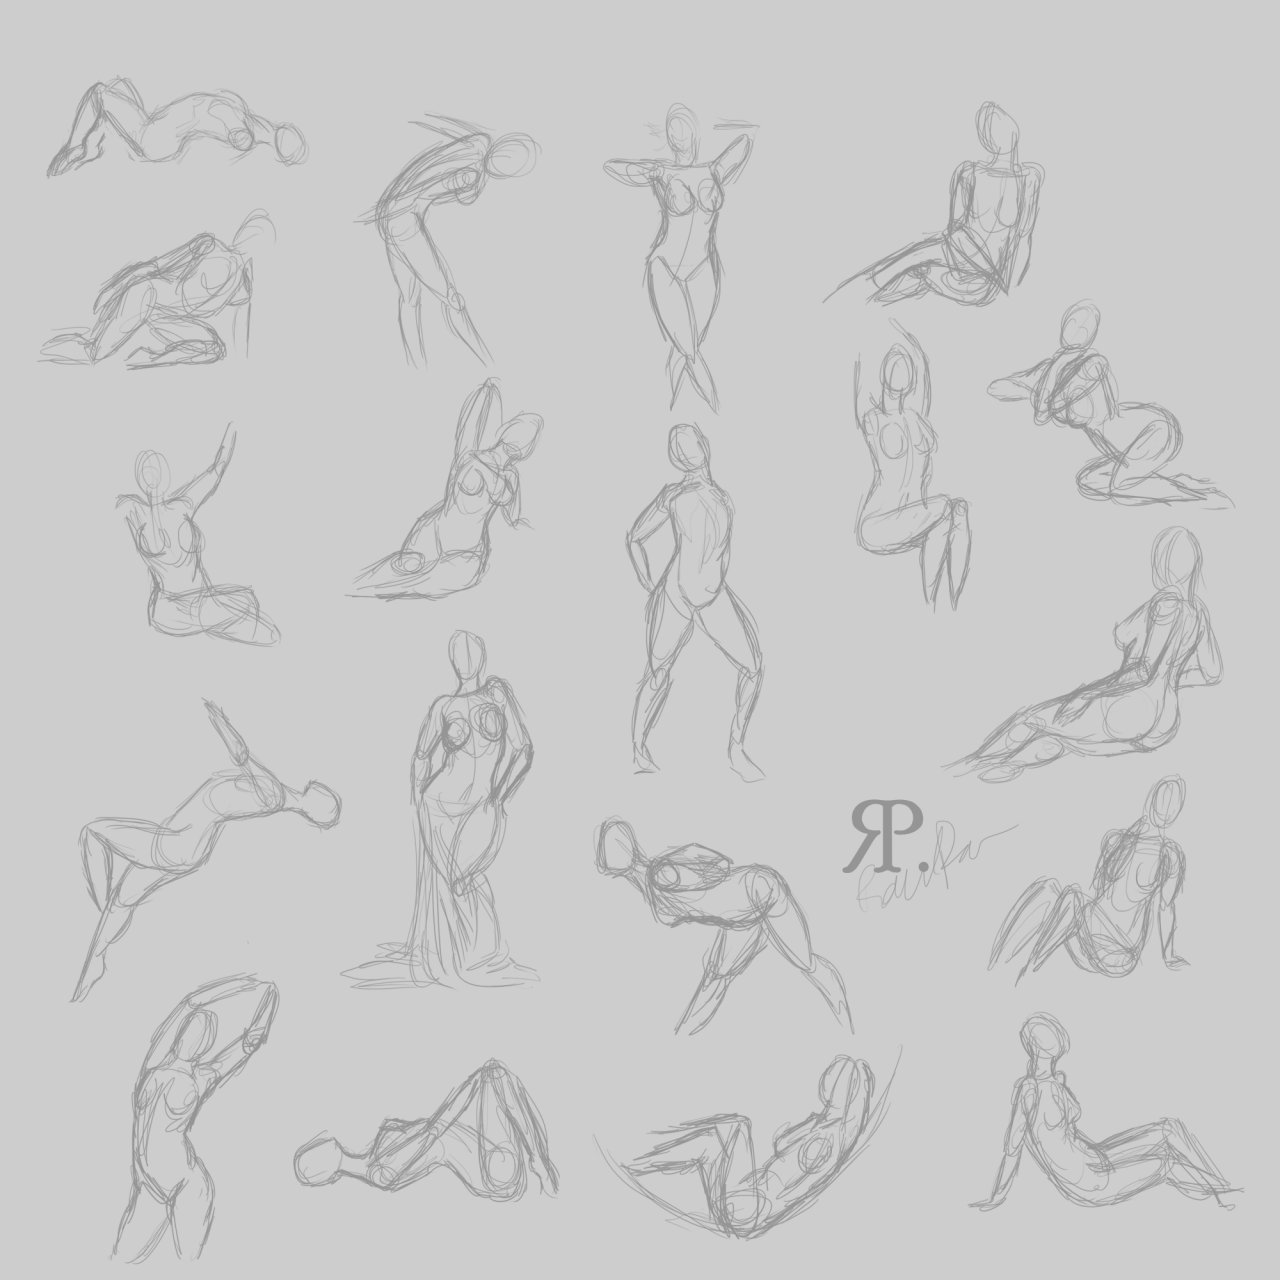 practice gesture drawing with me - 2 minutes pose - G01 - YouTube